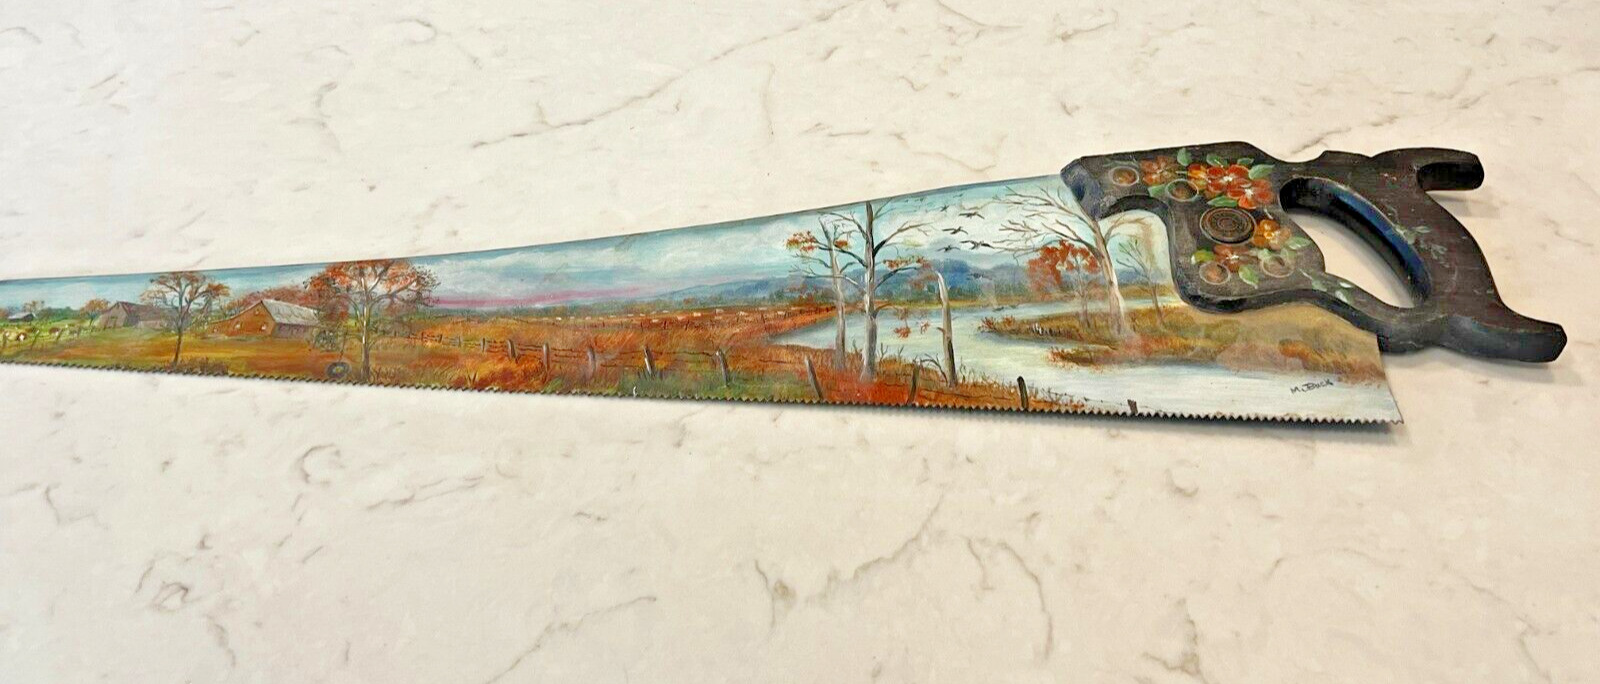 Antique Disston Saw Hand Painted Country Landscape Rustic Artist Signed